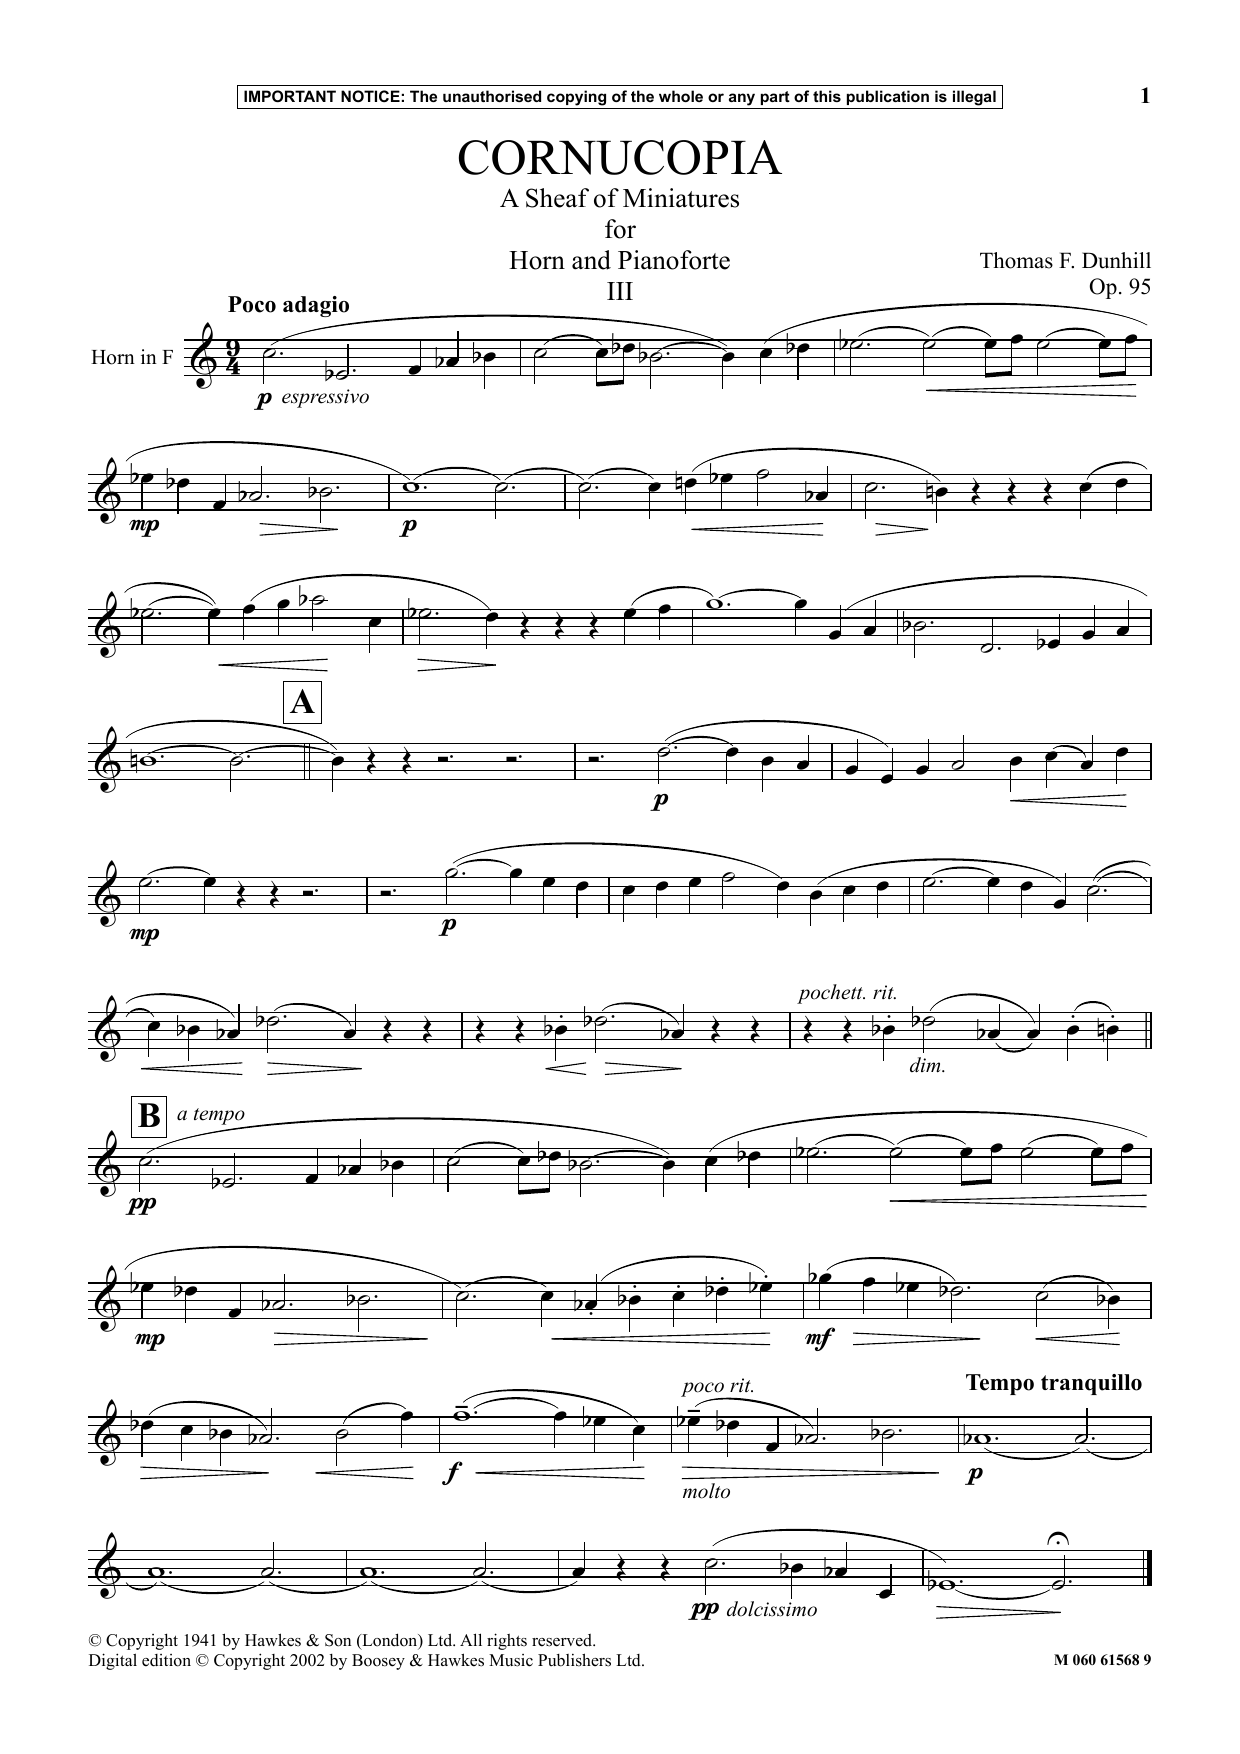 Download Thomas F. Dunhill Cornucopia- A Sheaf Of Miniatures For H Sheet Music